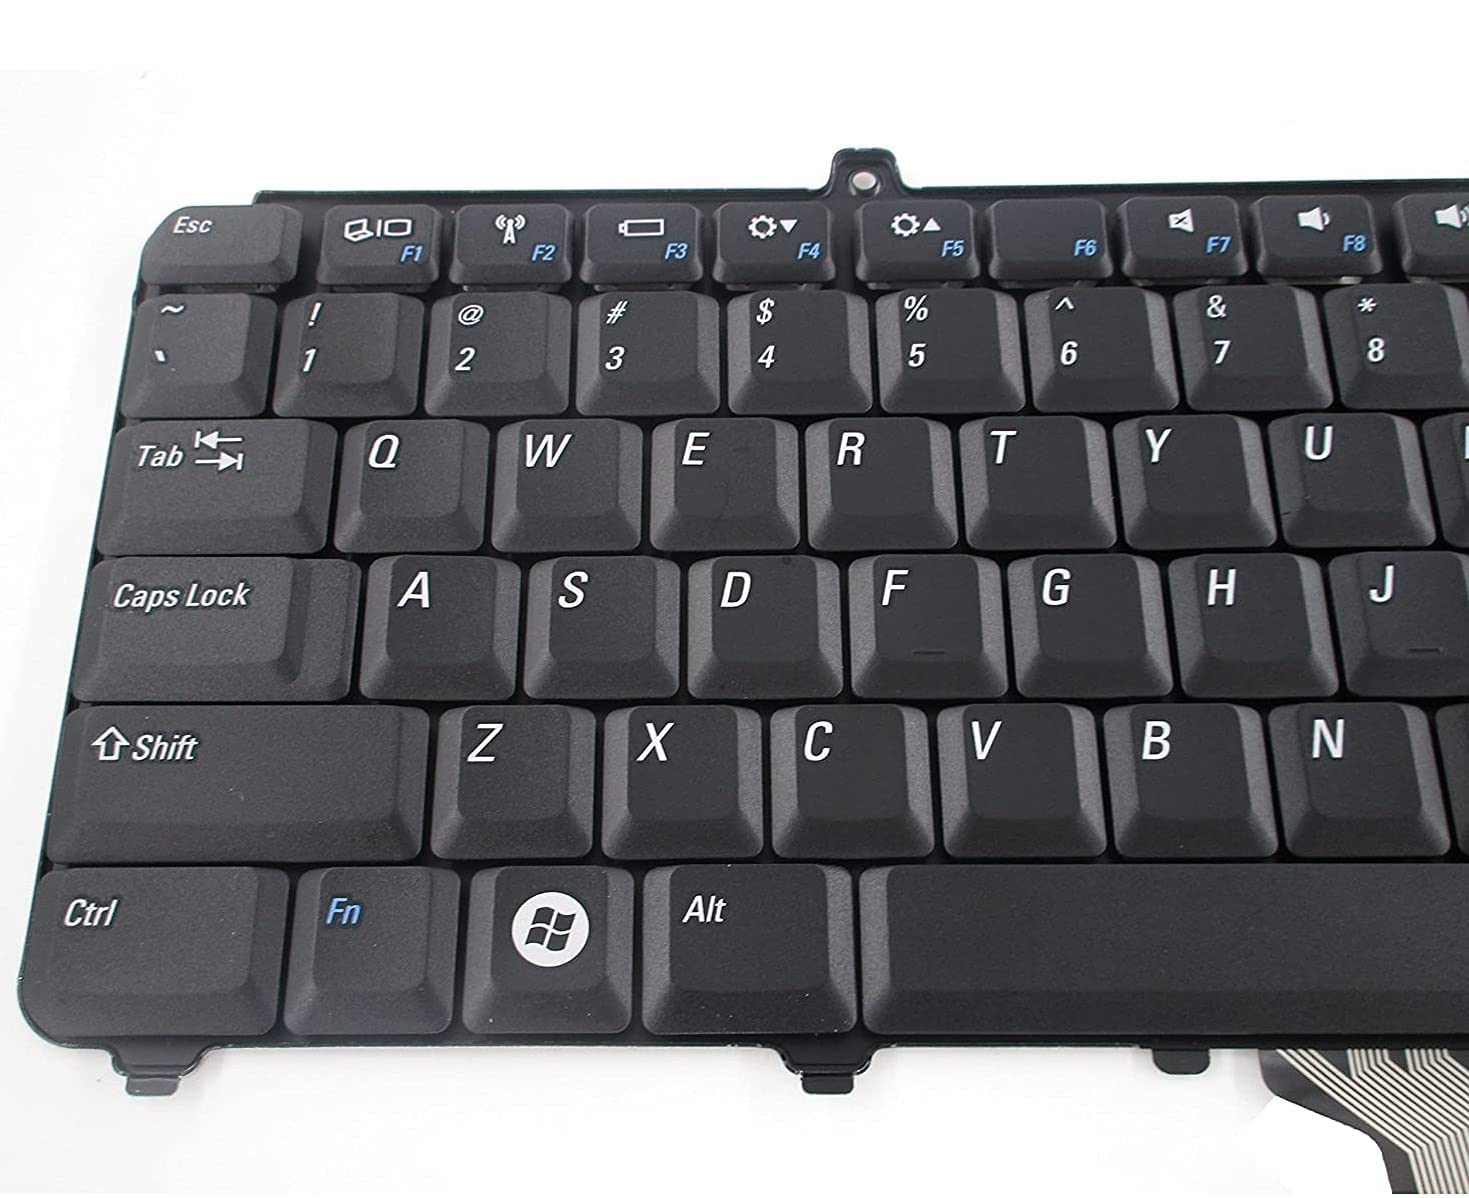 WISTAR Laptop Keyboard Compatible for Dell Inspiron 1525 Vostro 1500 500 XPS M1330 XPS M1530, P/N: NSK-D9001 NK750 0NK750